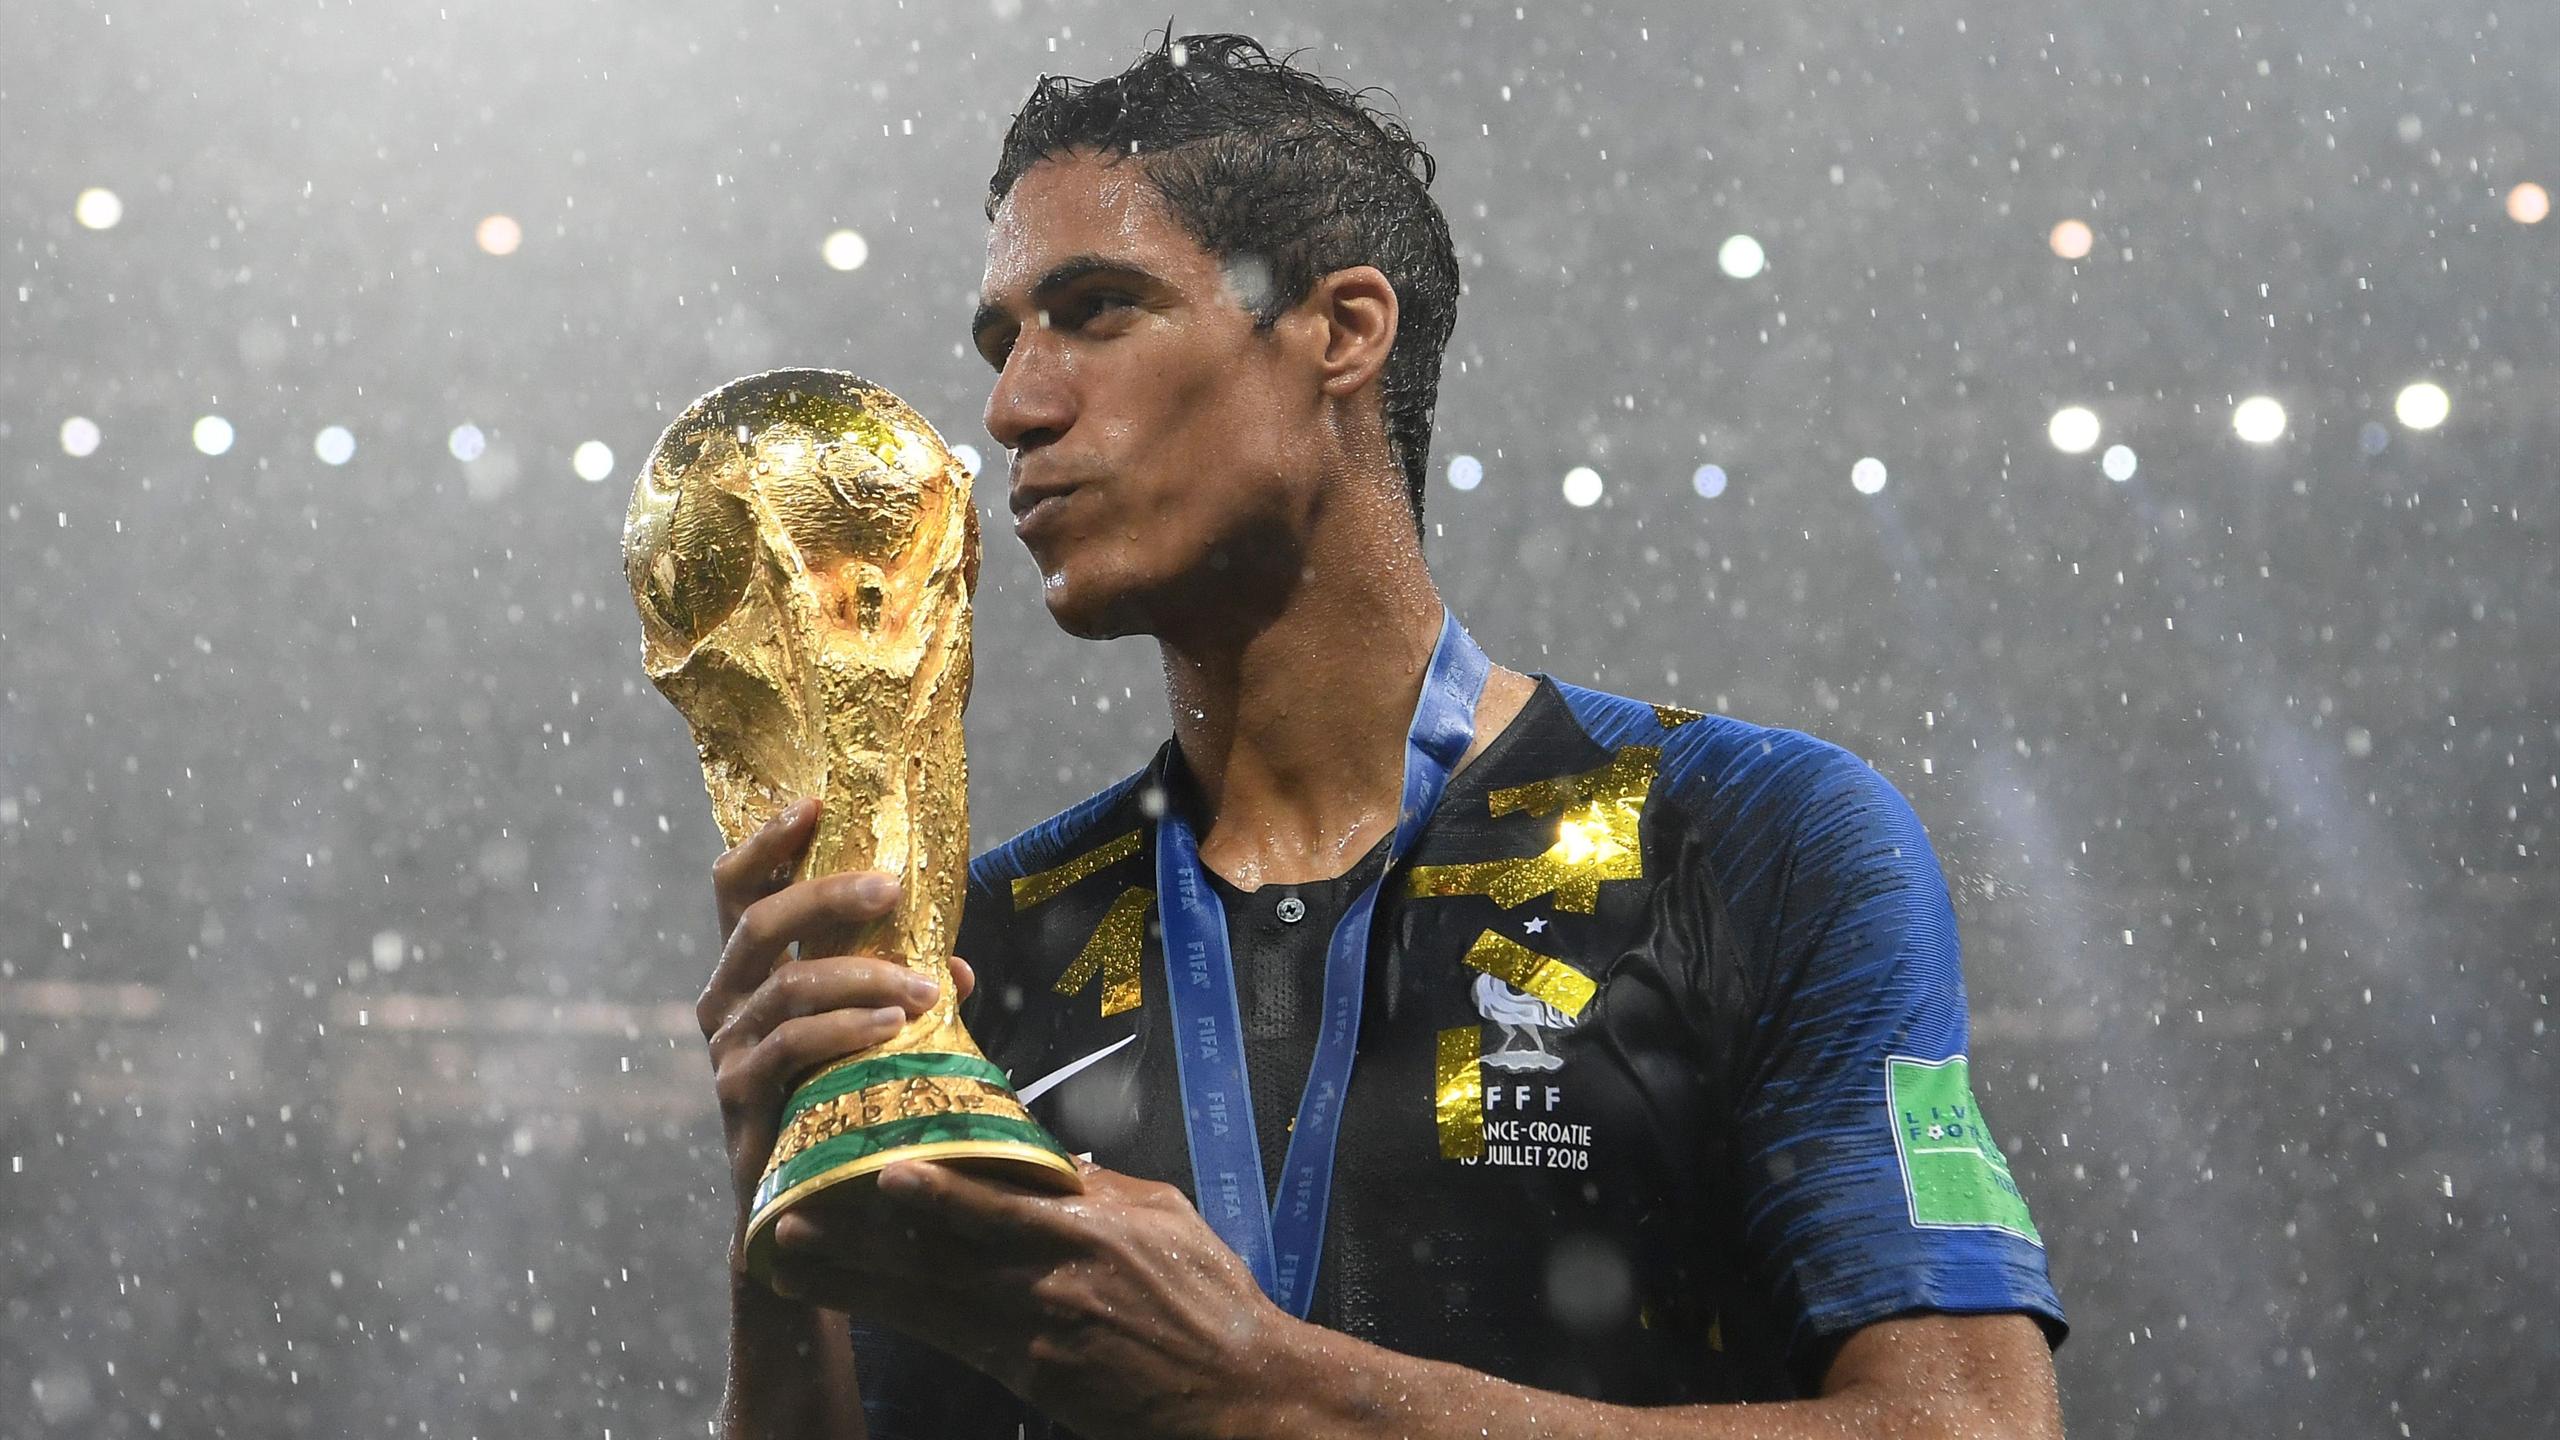 Varane has won the World Cup in 2018